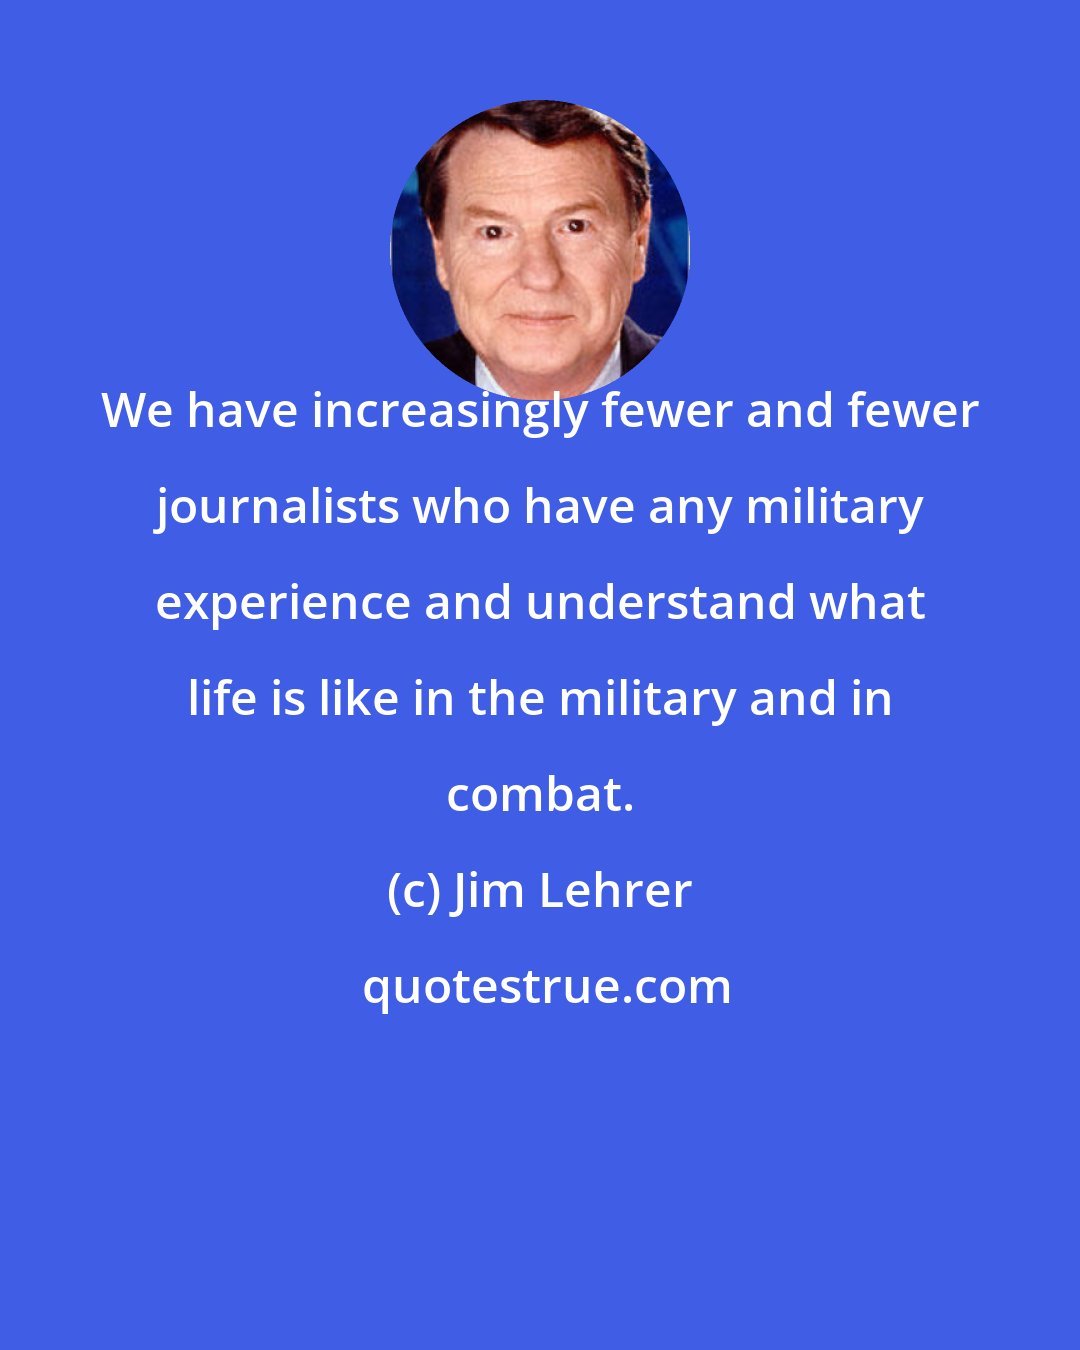 Jim Lehrer: We have increasingly fewer and fewer journalists who have any military experience and understand what life is like in the military and in combat.